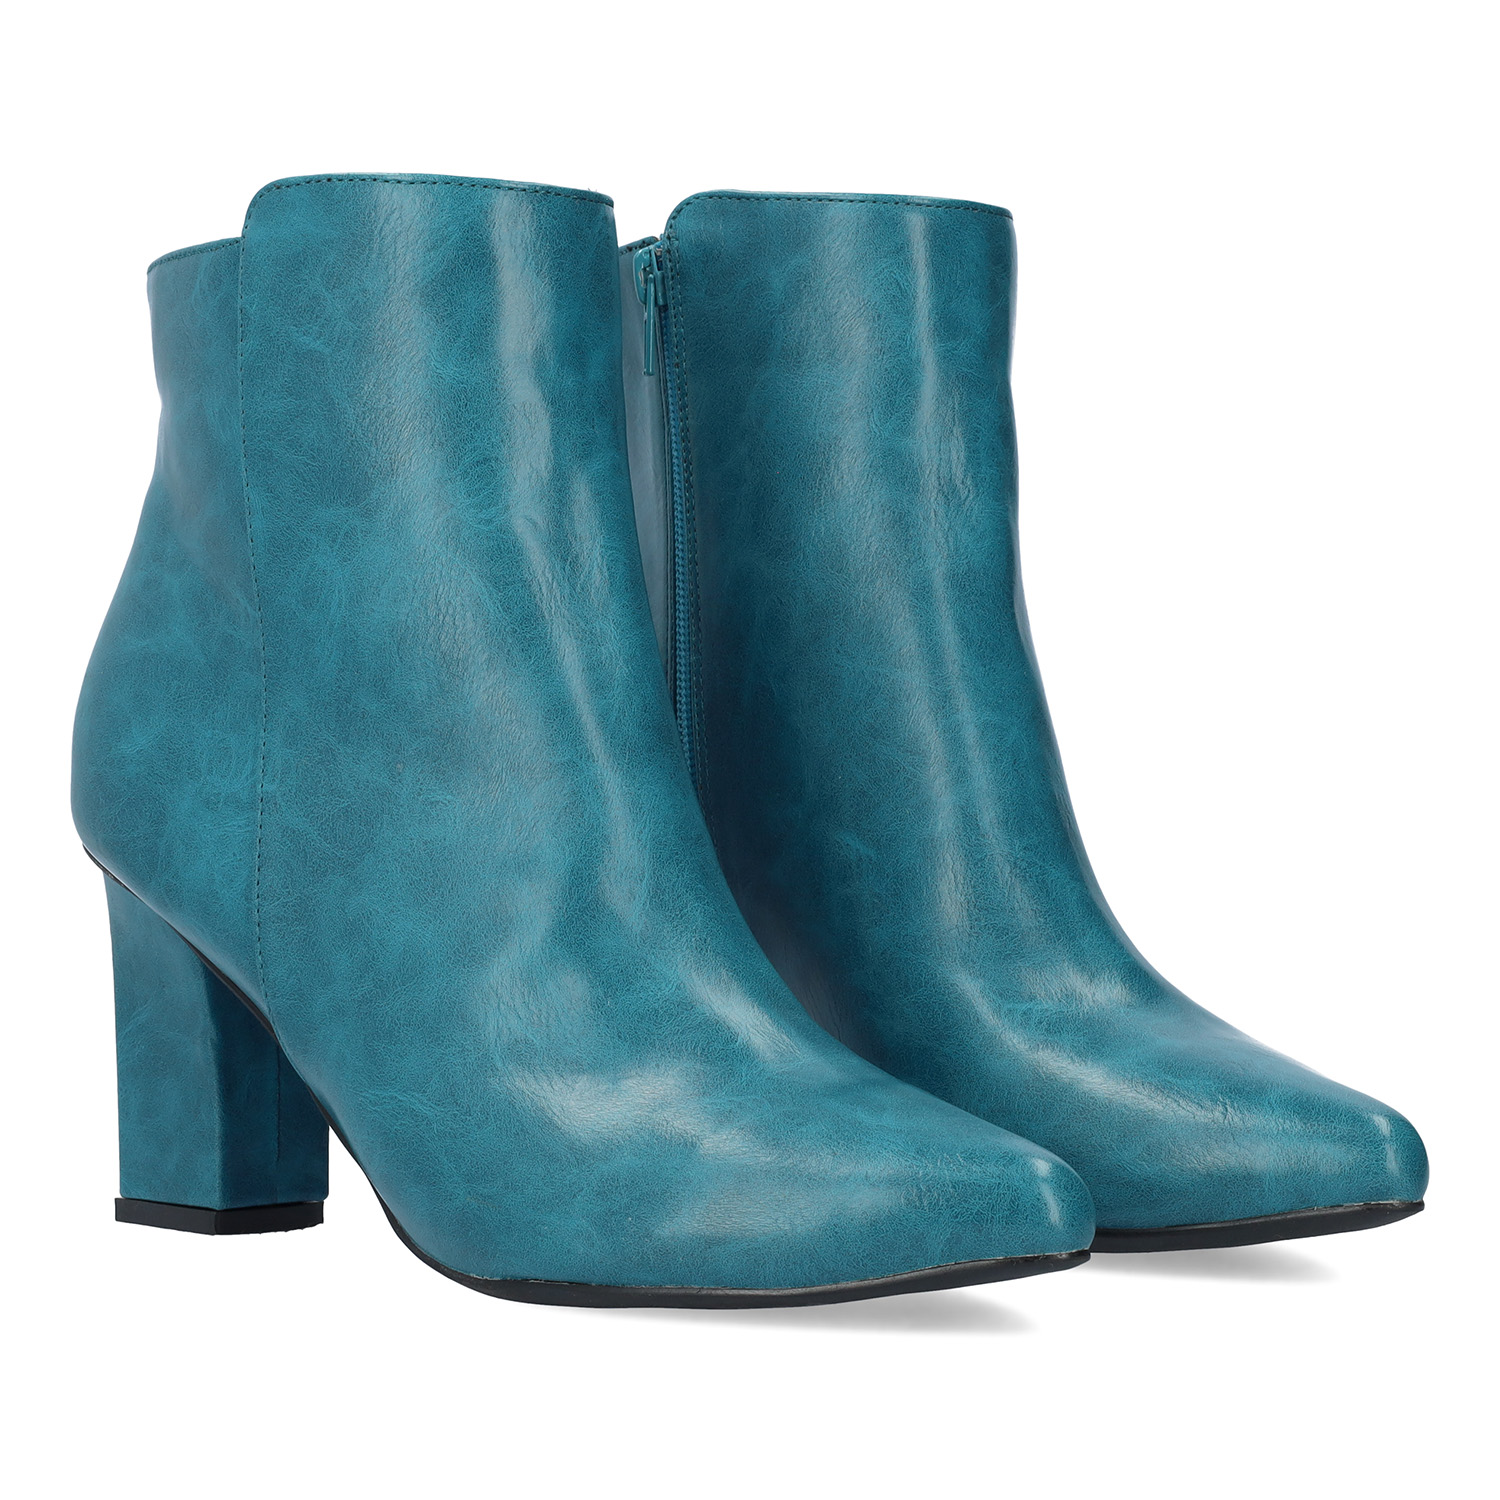 Heeled booties in blue faux leather.